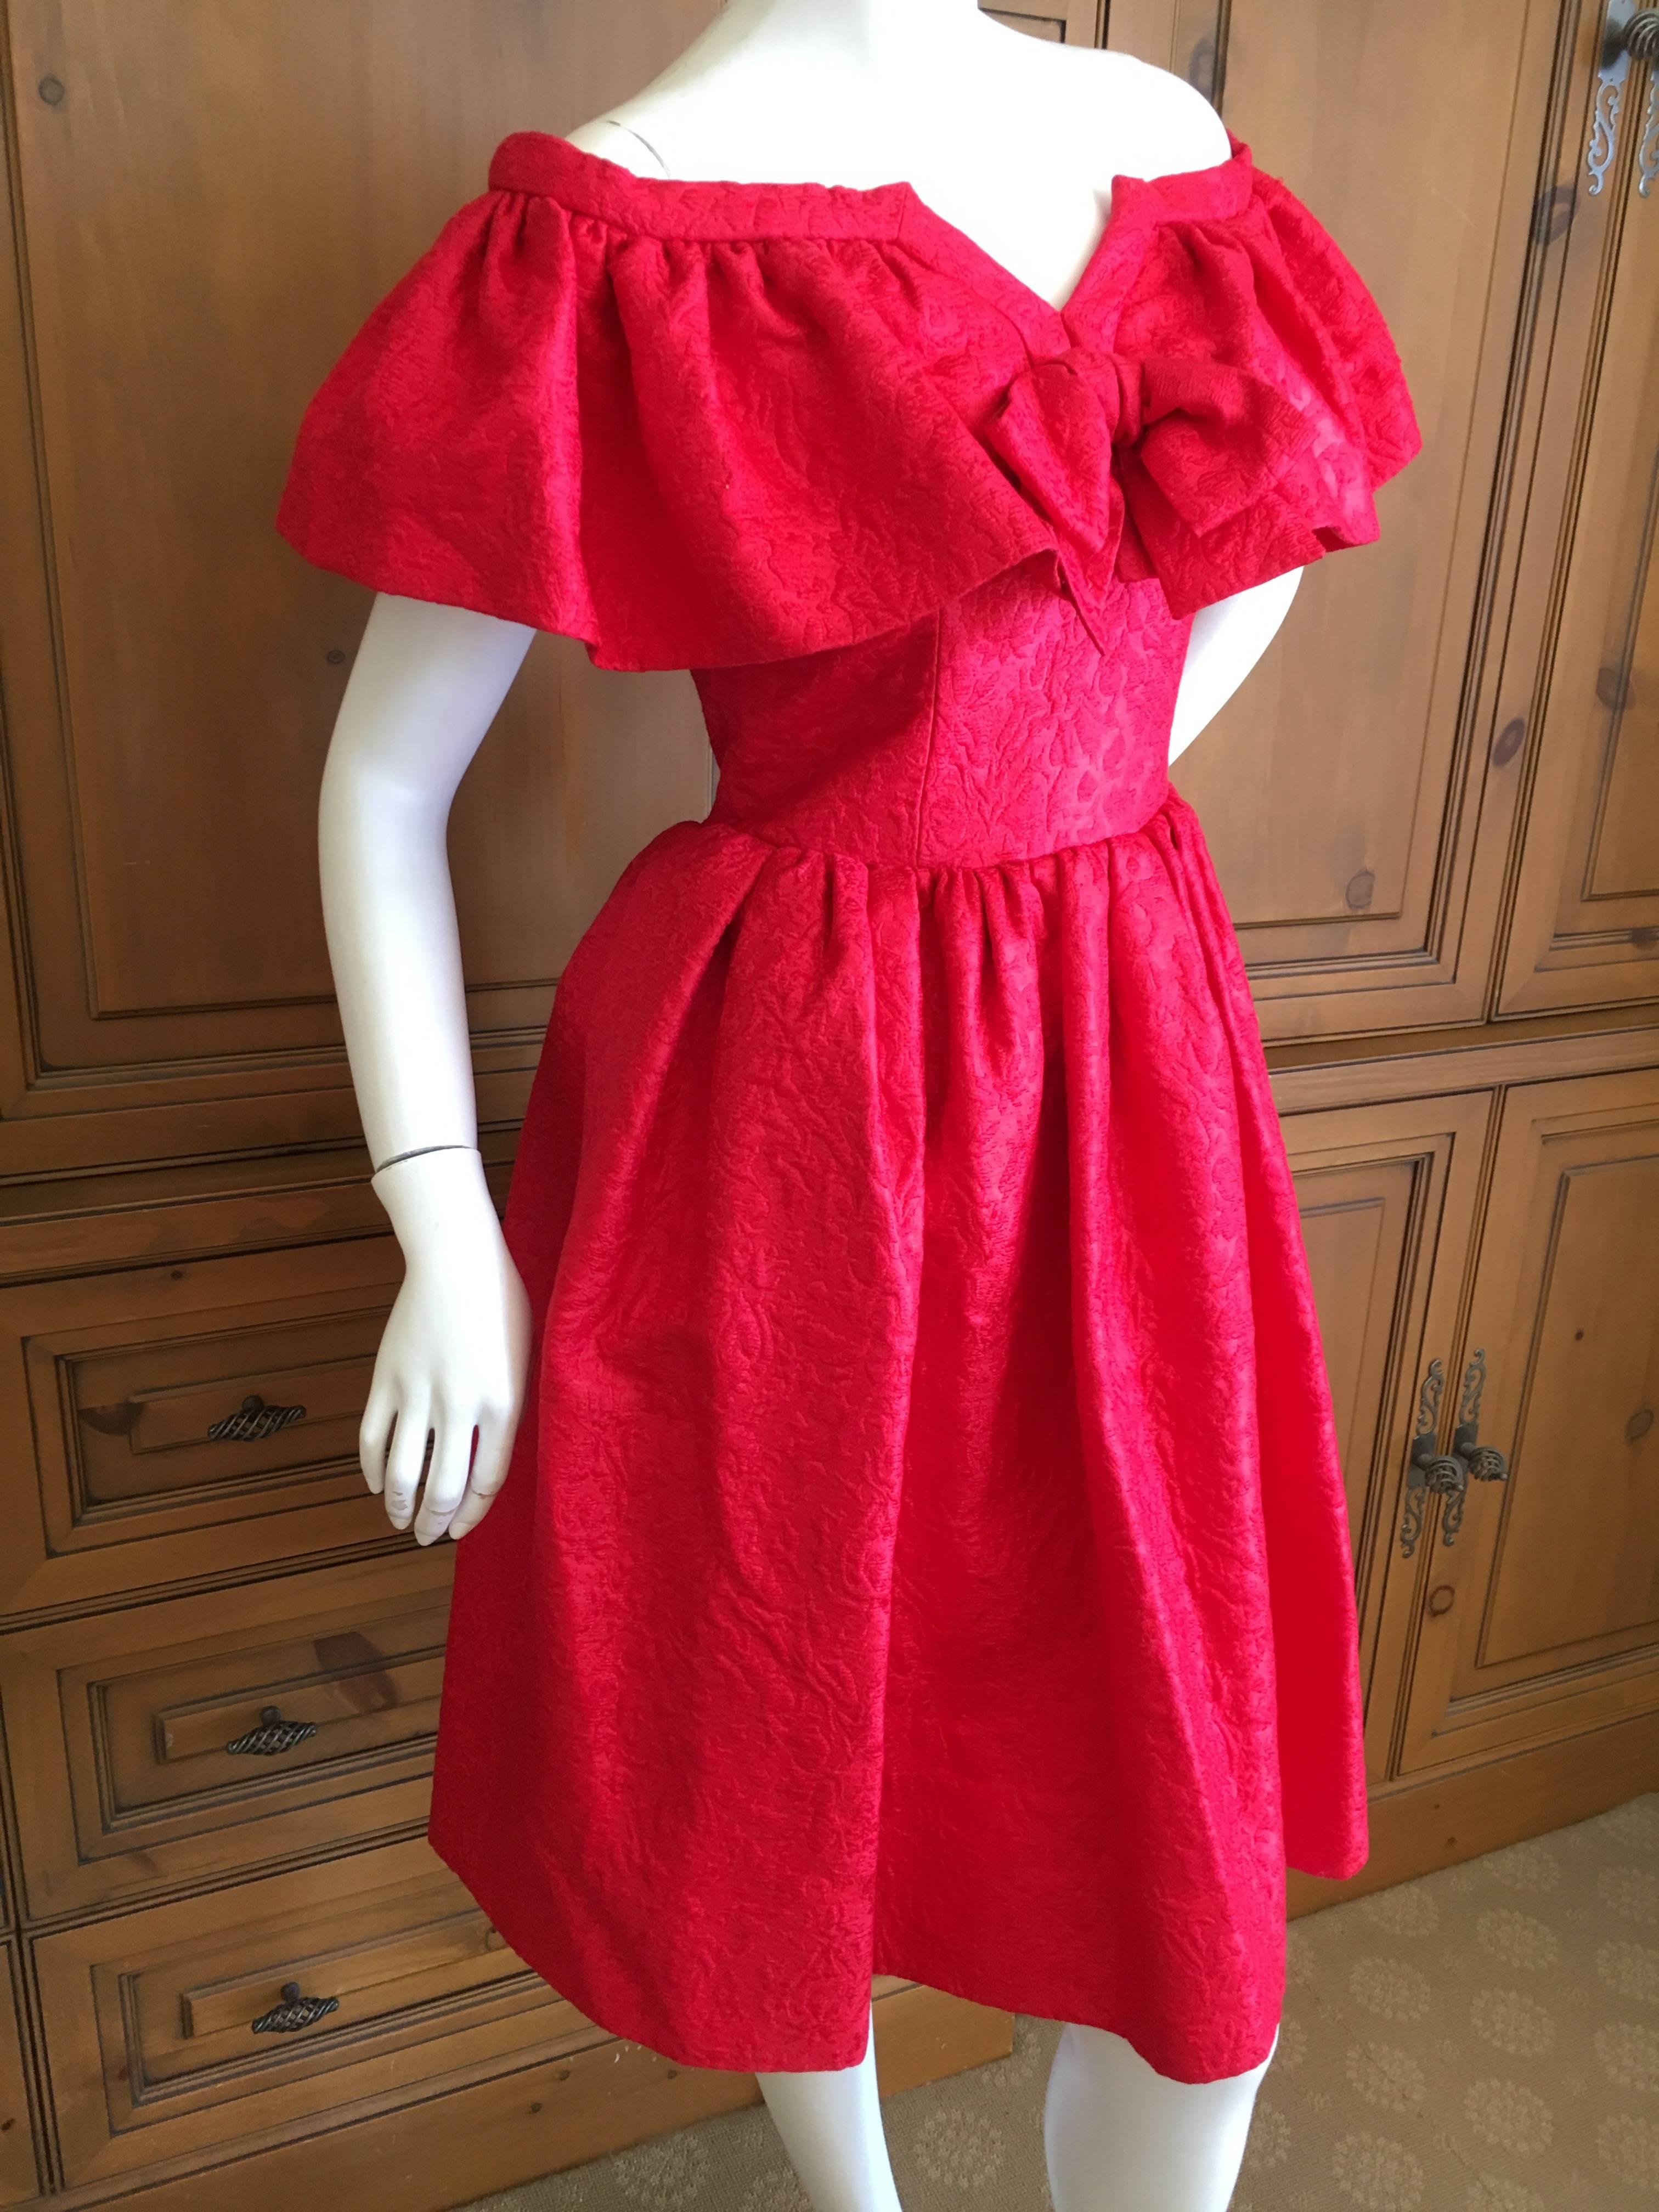 Yves Saint Laurent 1970's Rive Gauche Off The Shoulder Jacquard Dress.
Created of scarlet red jacquard with an off the shoulder capelet and delightful center bow, the skirt is very full.
SIze 40
Bust 39"
Waist 28"
Hips 40"
Length